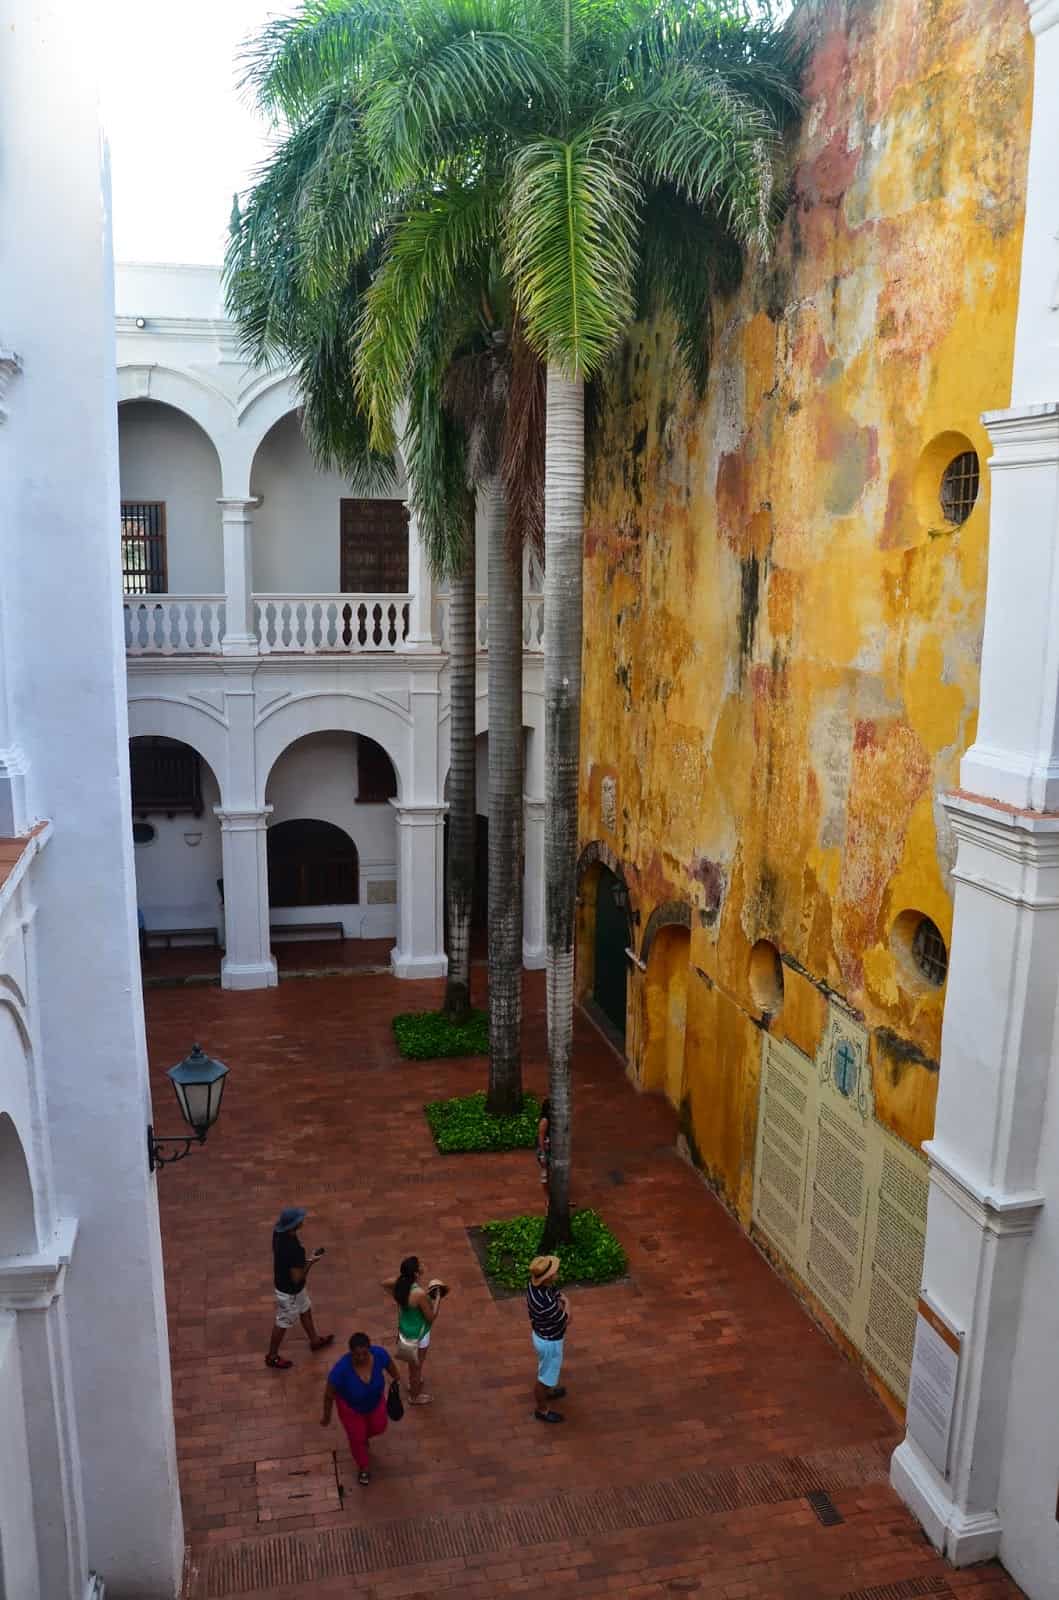 Inner courtyard of the Palace of the Inquisition (Cartagena Historical Museum)